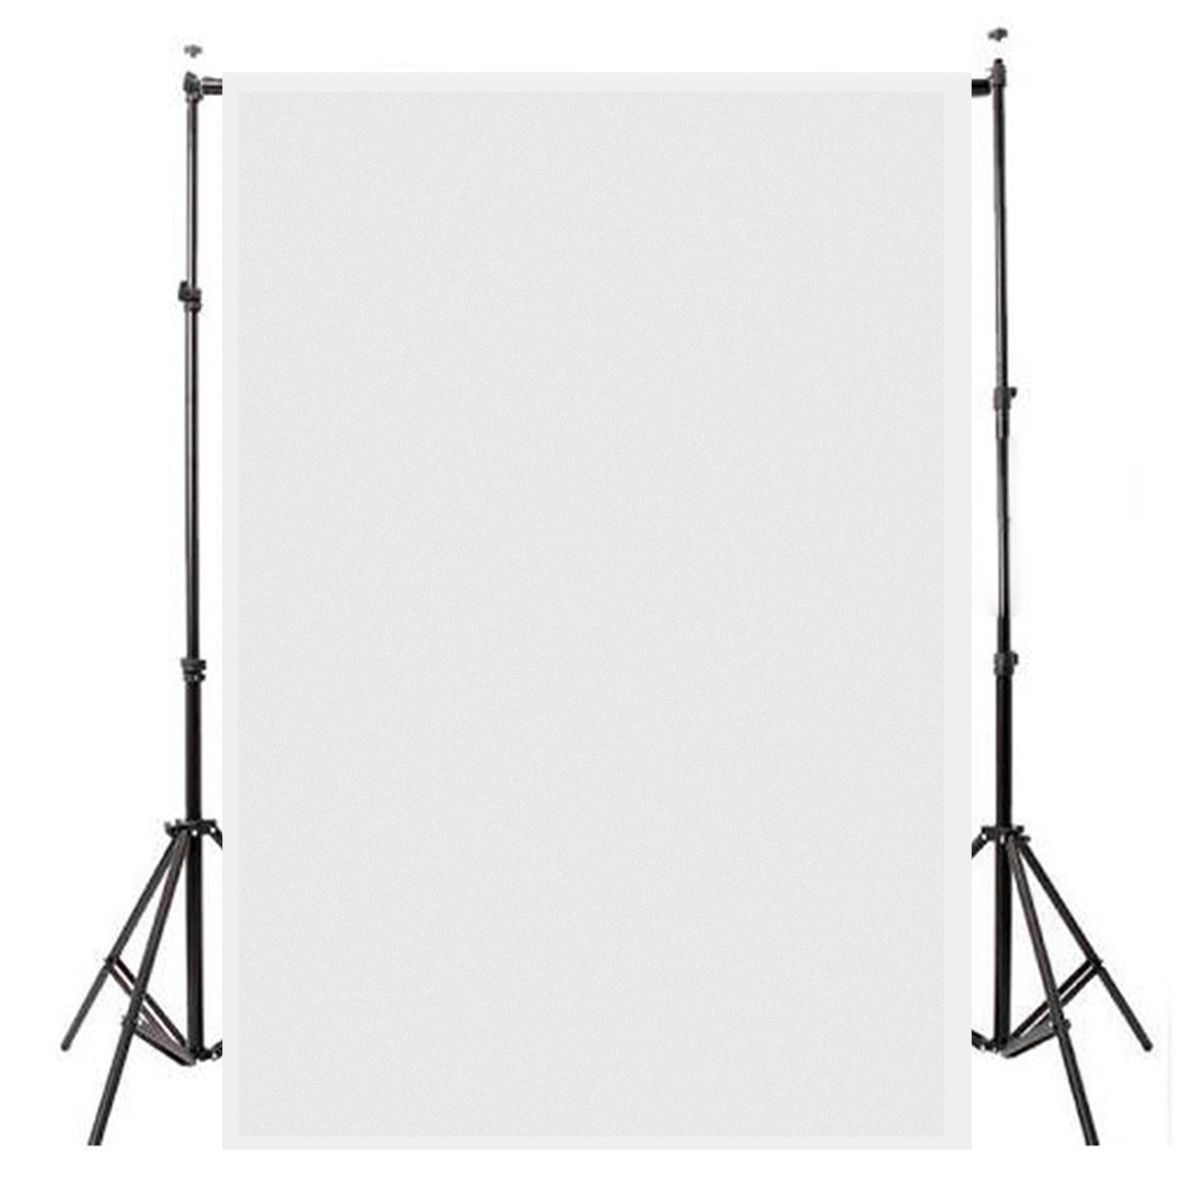 6x9FT-Green-Black-White-Blue-Yellow-Pink-Grey-Solid-Color-Photography-Backdrop-Studio-Prop-Backgroun-1401670